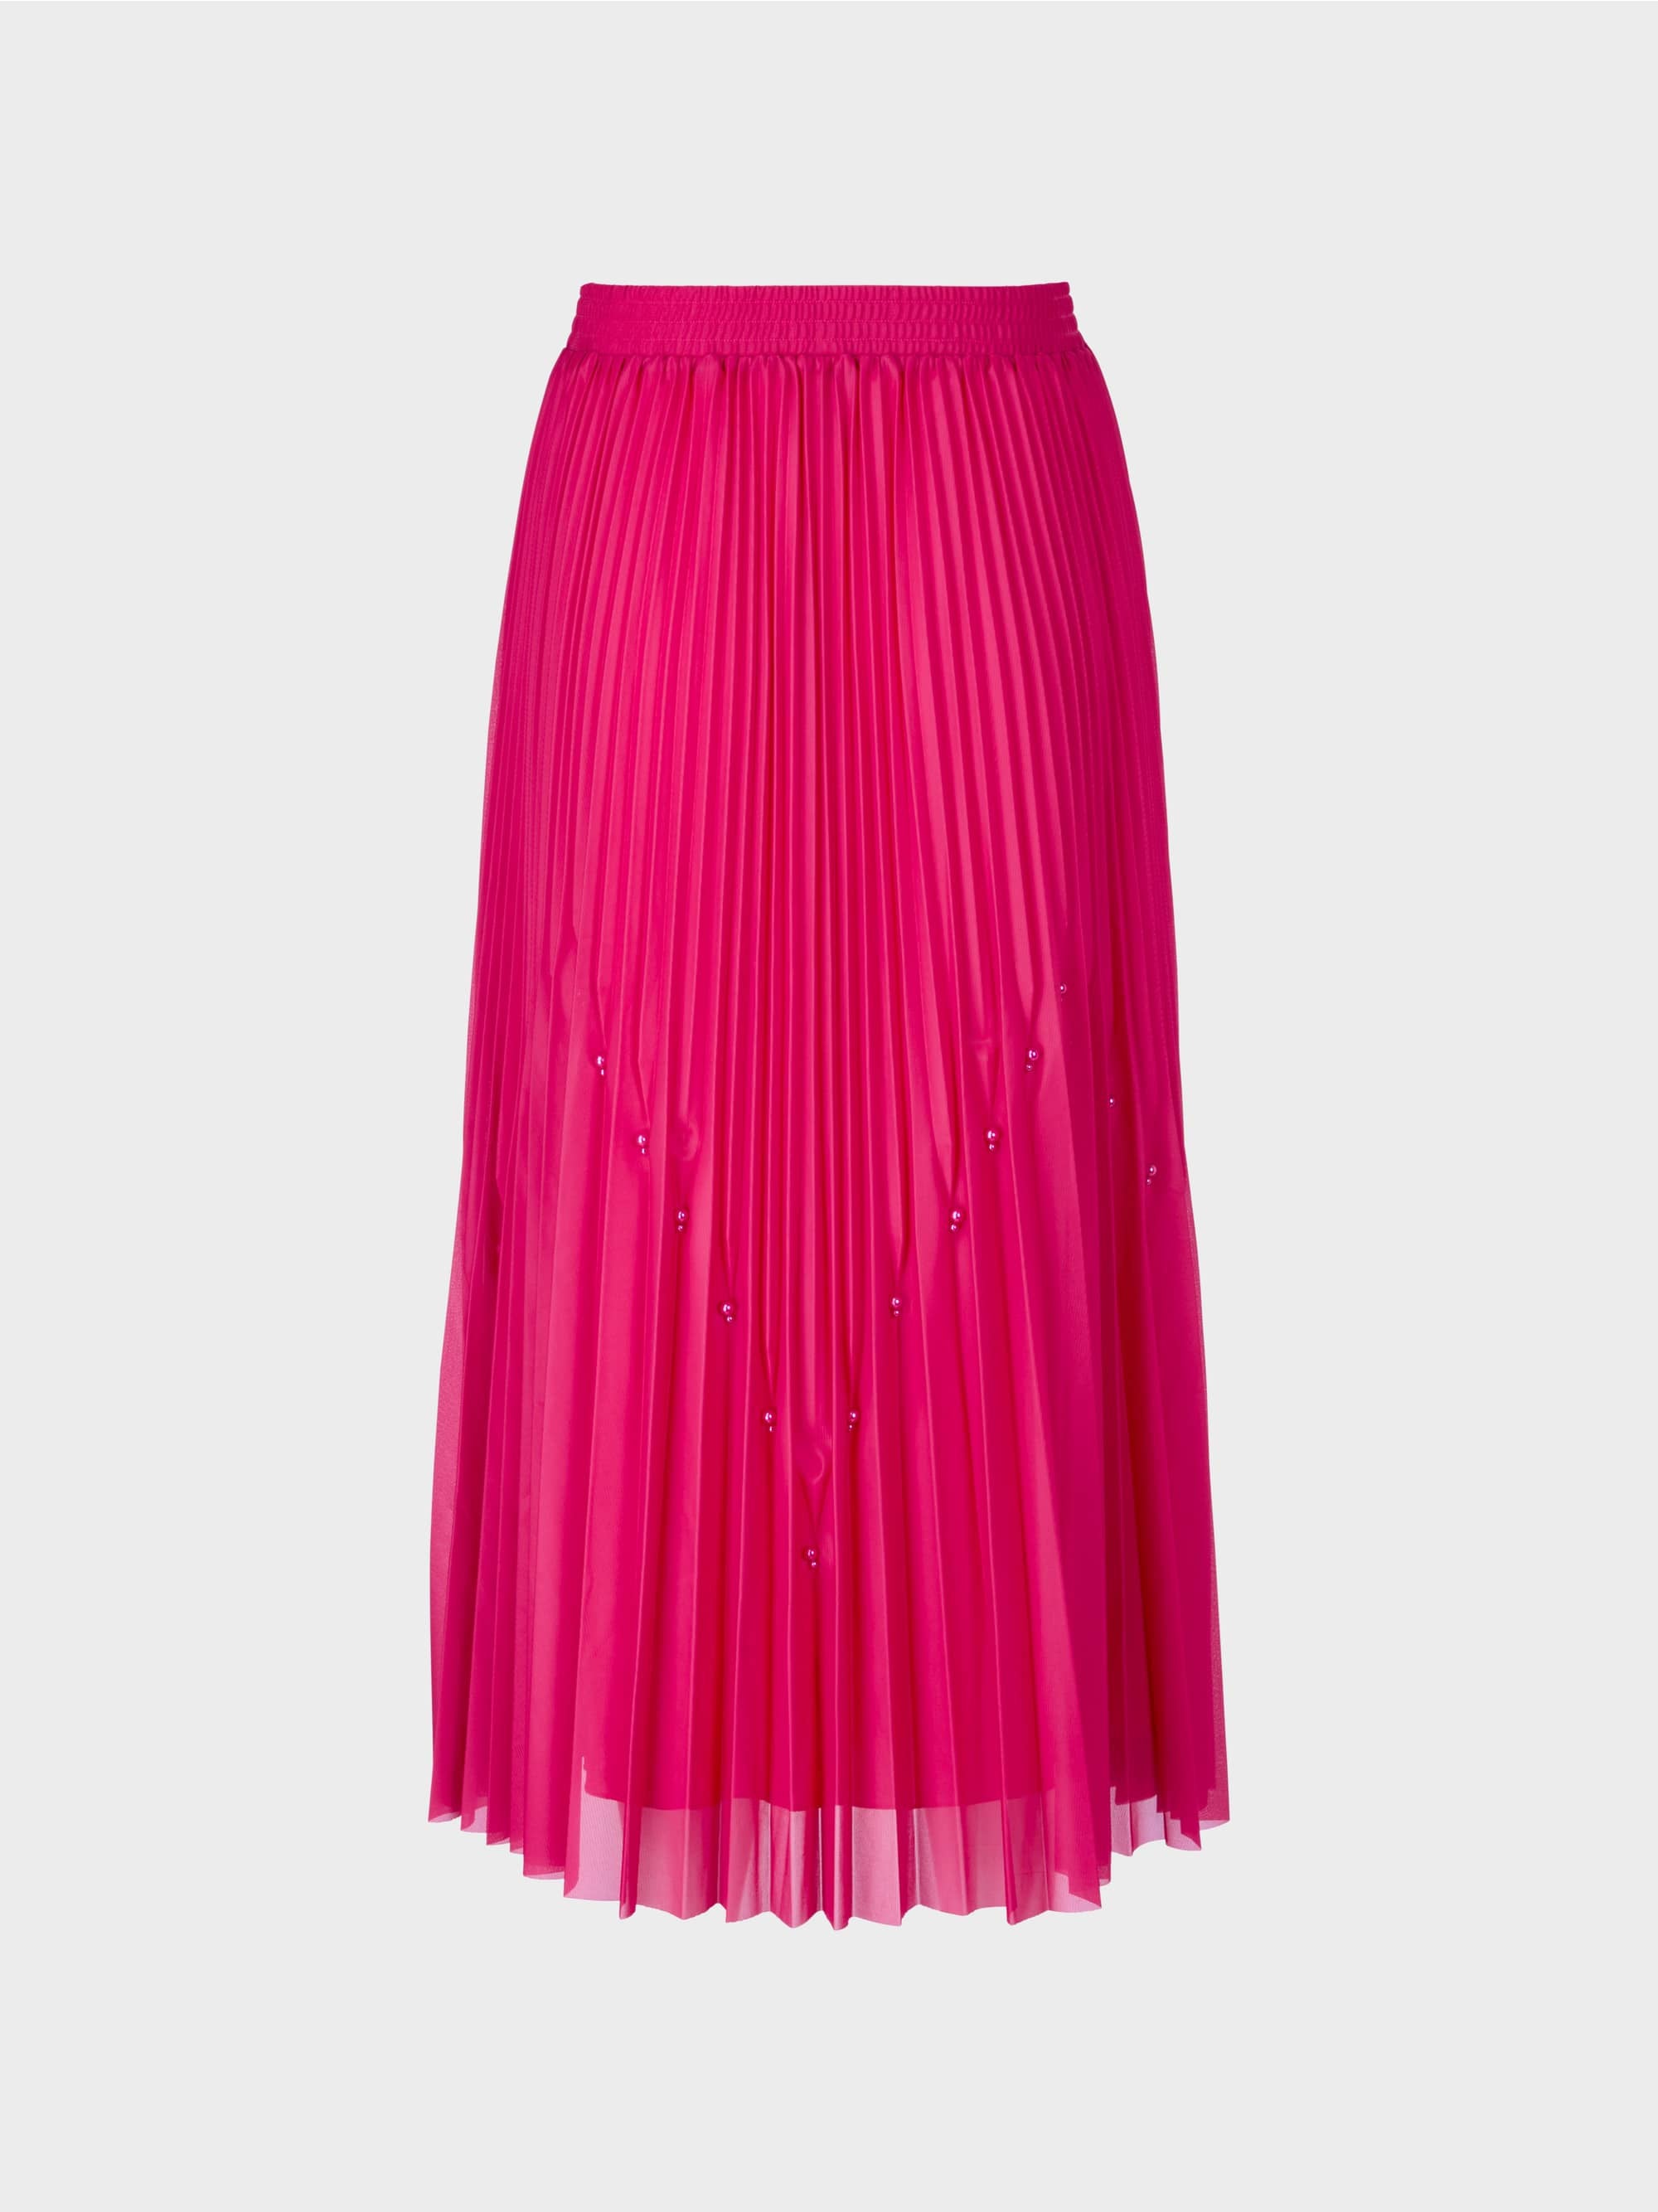 Pleated Skirt With Beads_Wc 71.29 W95_267_07